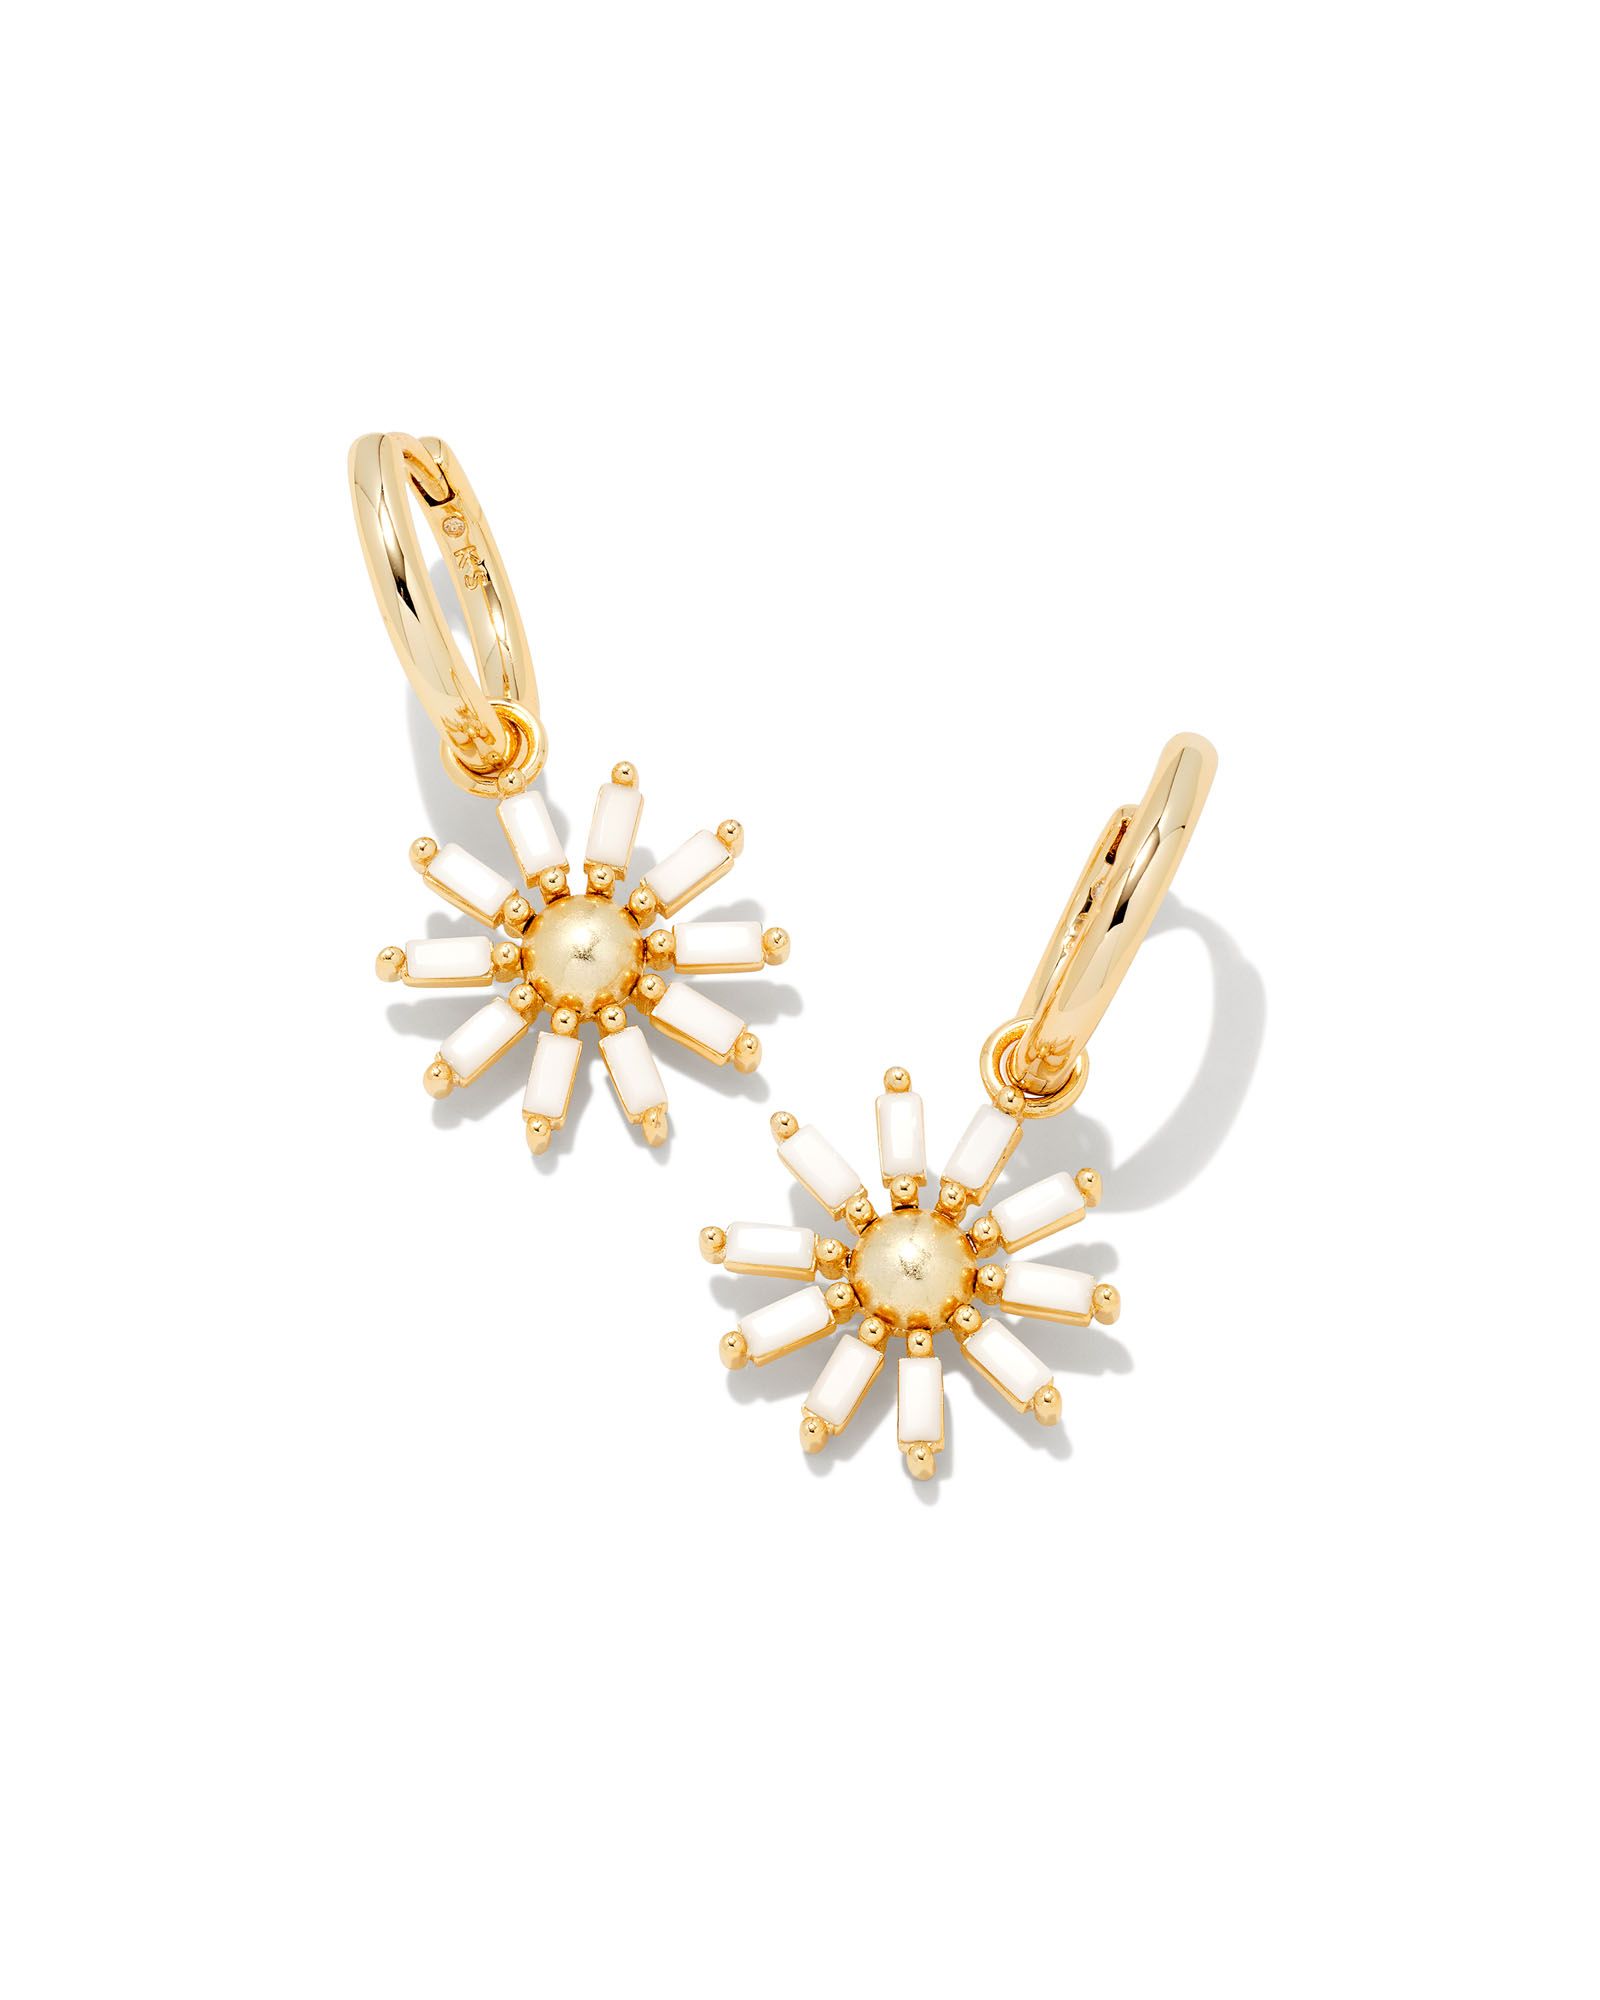 Madison Daisy Convertible Gold Huggie Earrings in White Opaque Glass | Kendra Scott